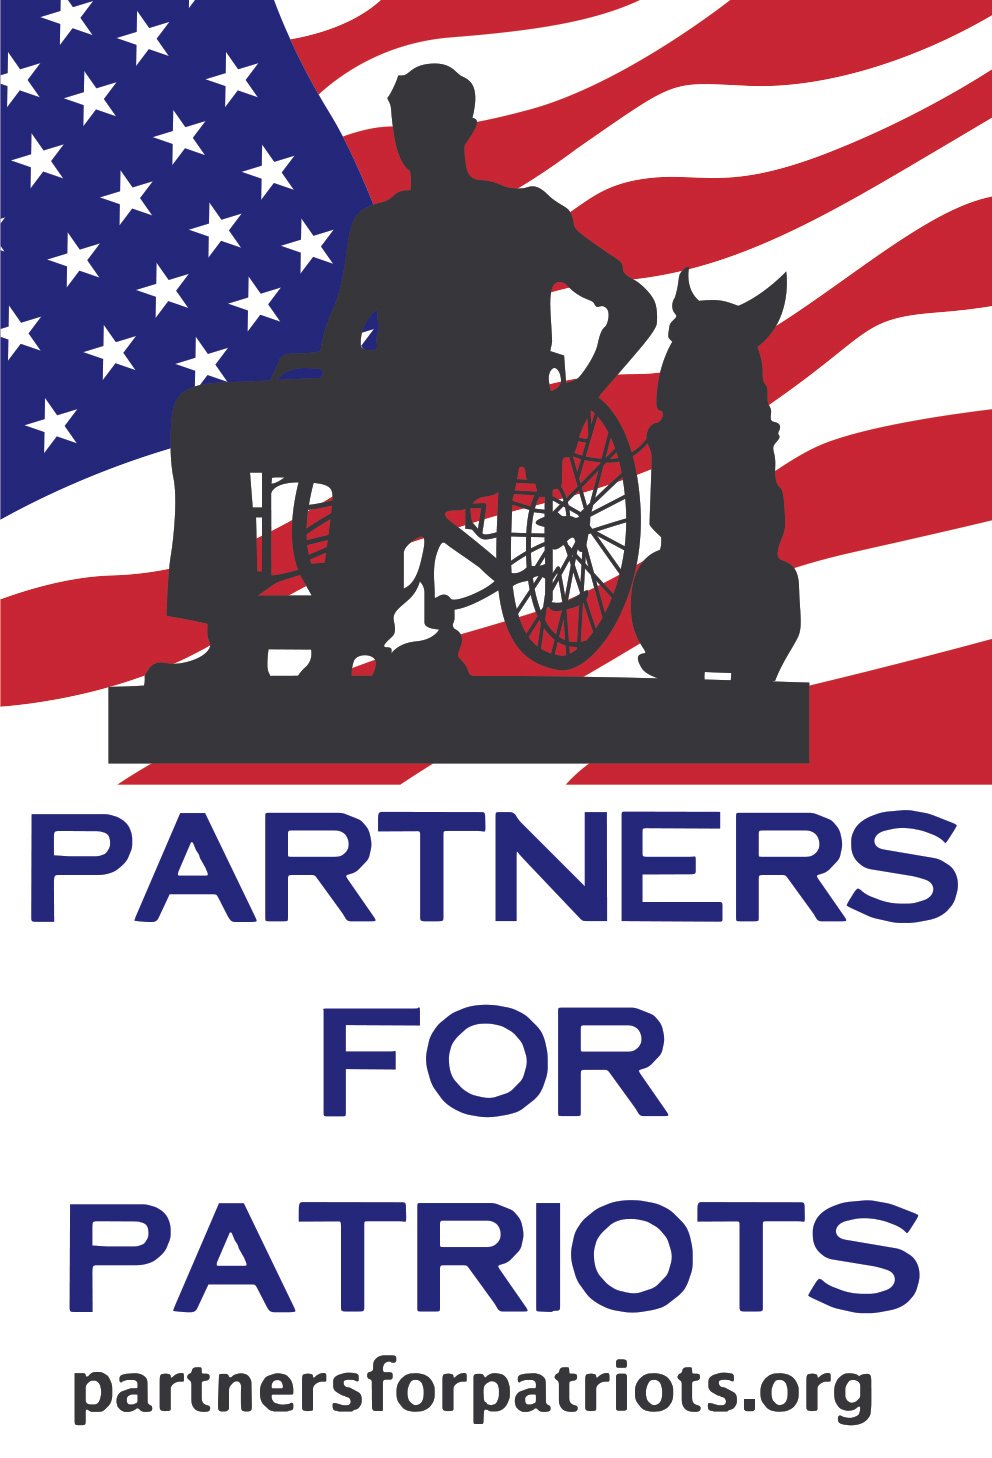 Partners for Patriots